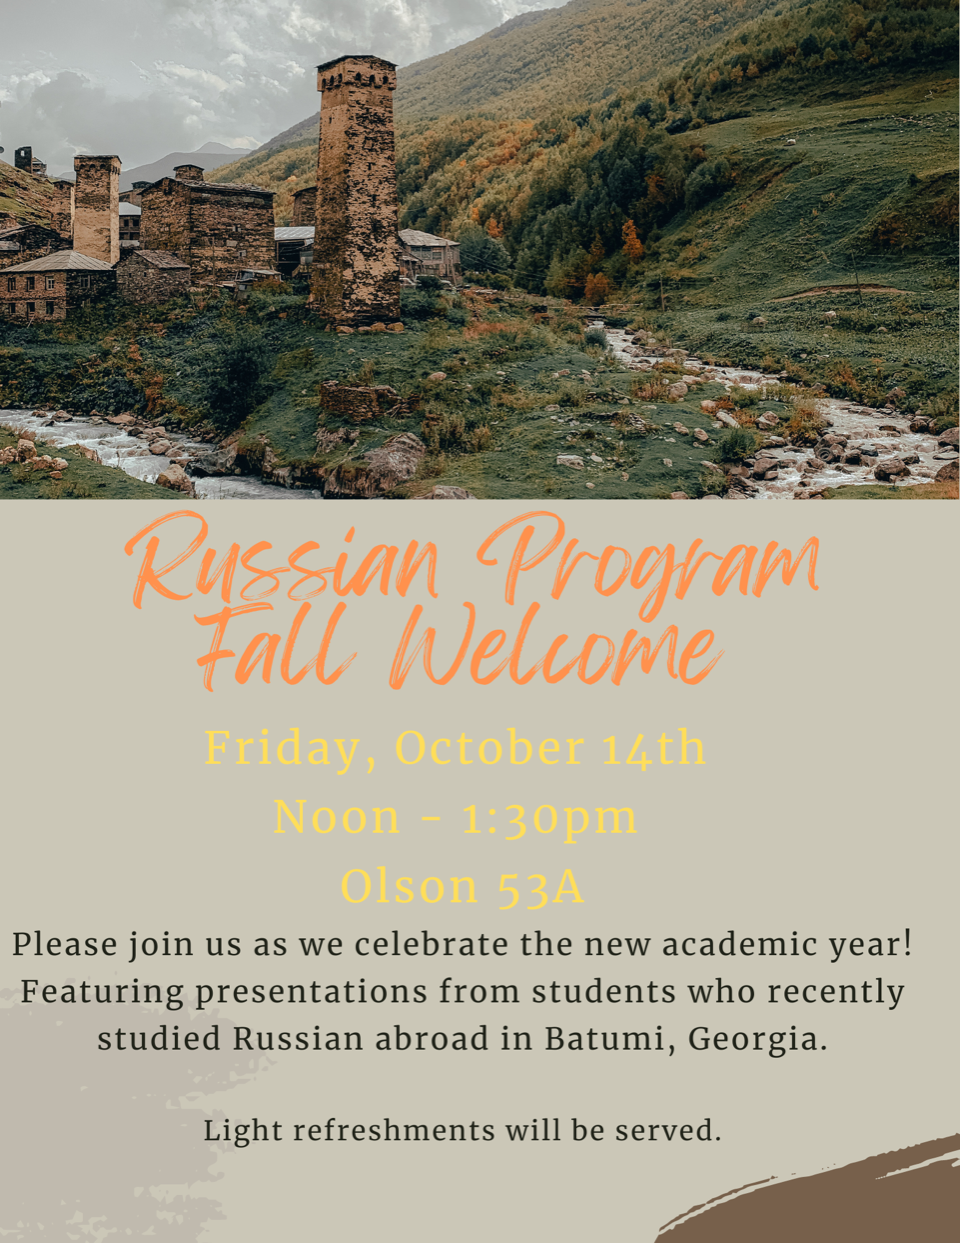 Flyer for Russian Program Fall Welcome Event